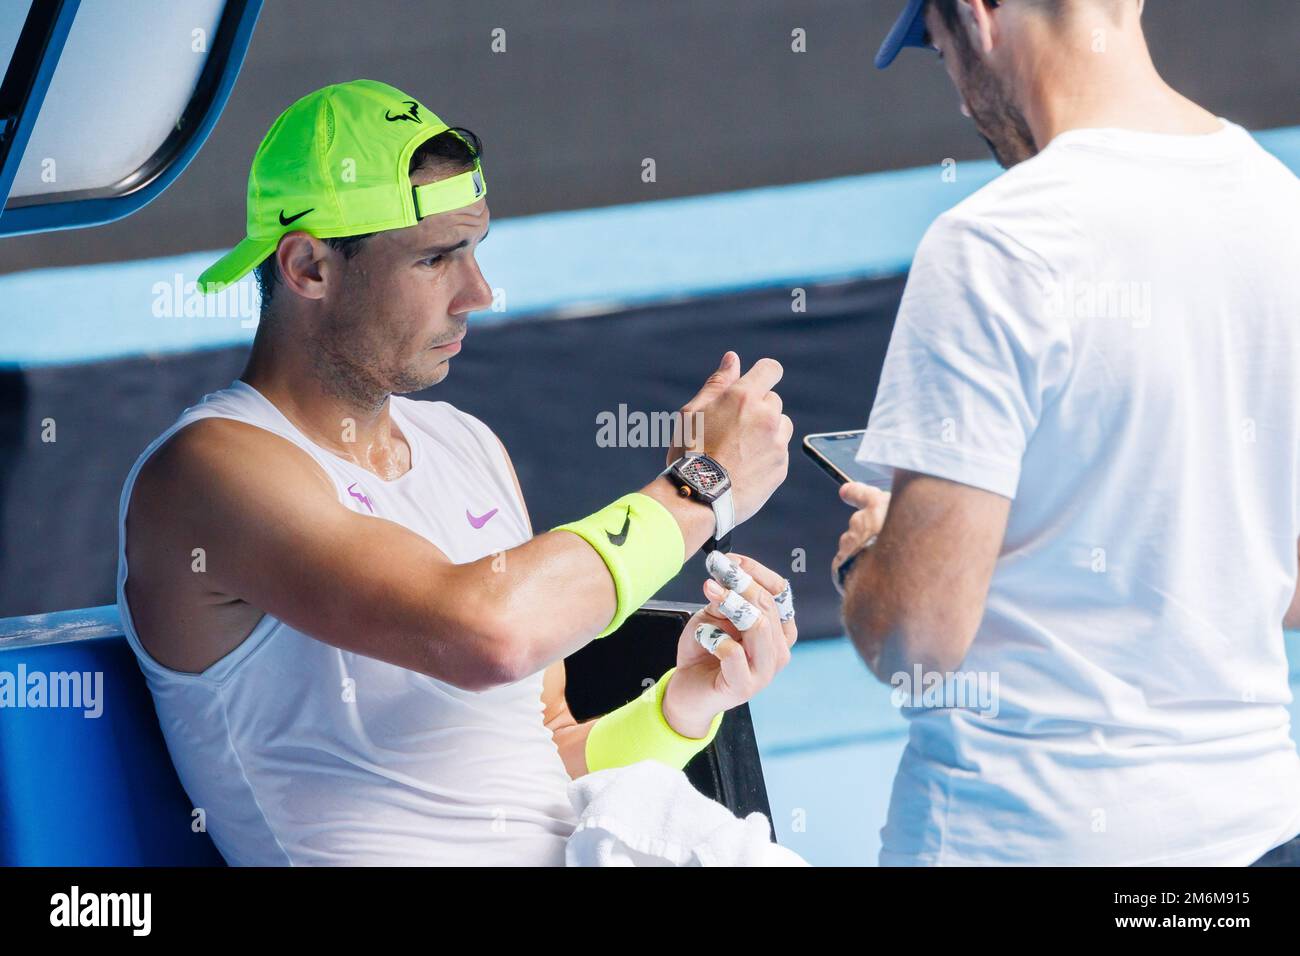 January 5, 2023 RAFAEL NADAL (ESP) adjusts his Richard Mille watch during a practice session on Rod Laver Arena ahead of the 2023 Australian Open in Melbourne, Australia